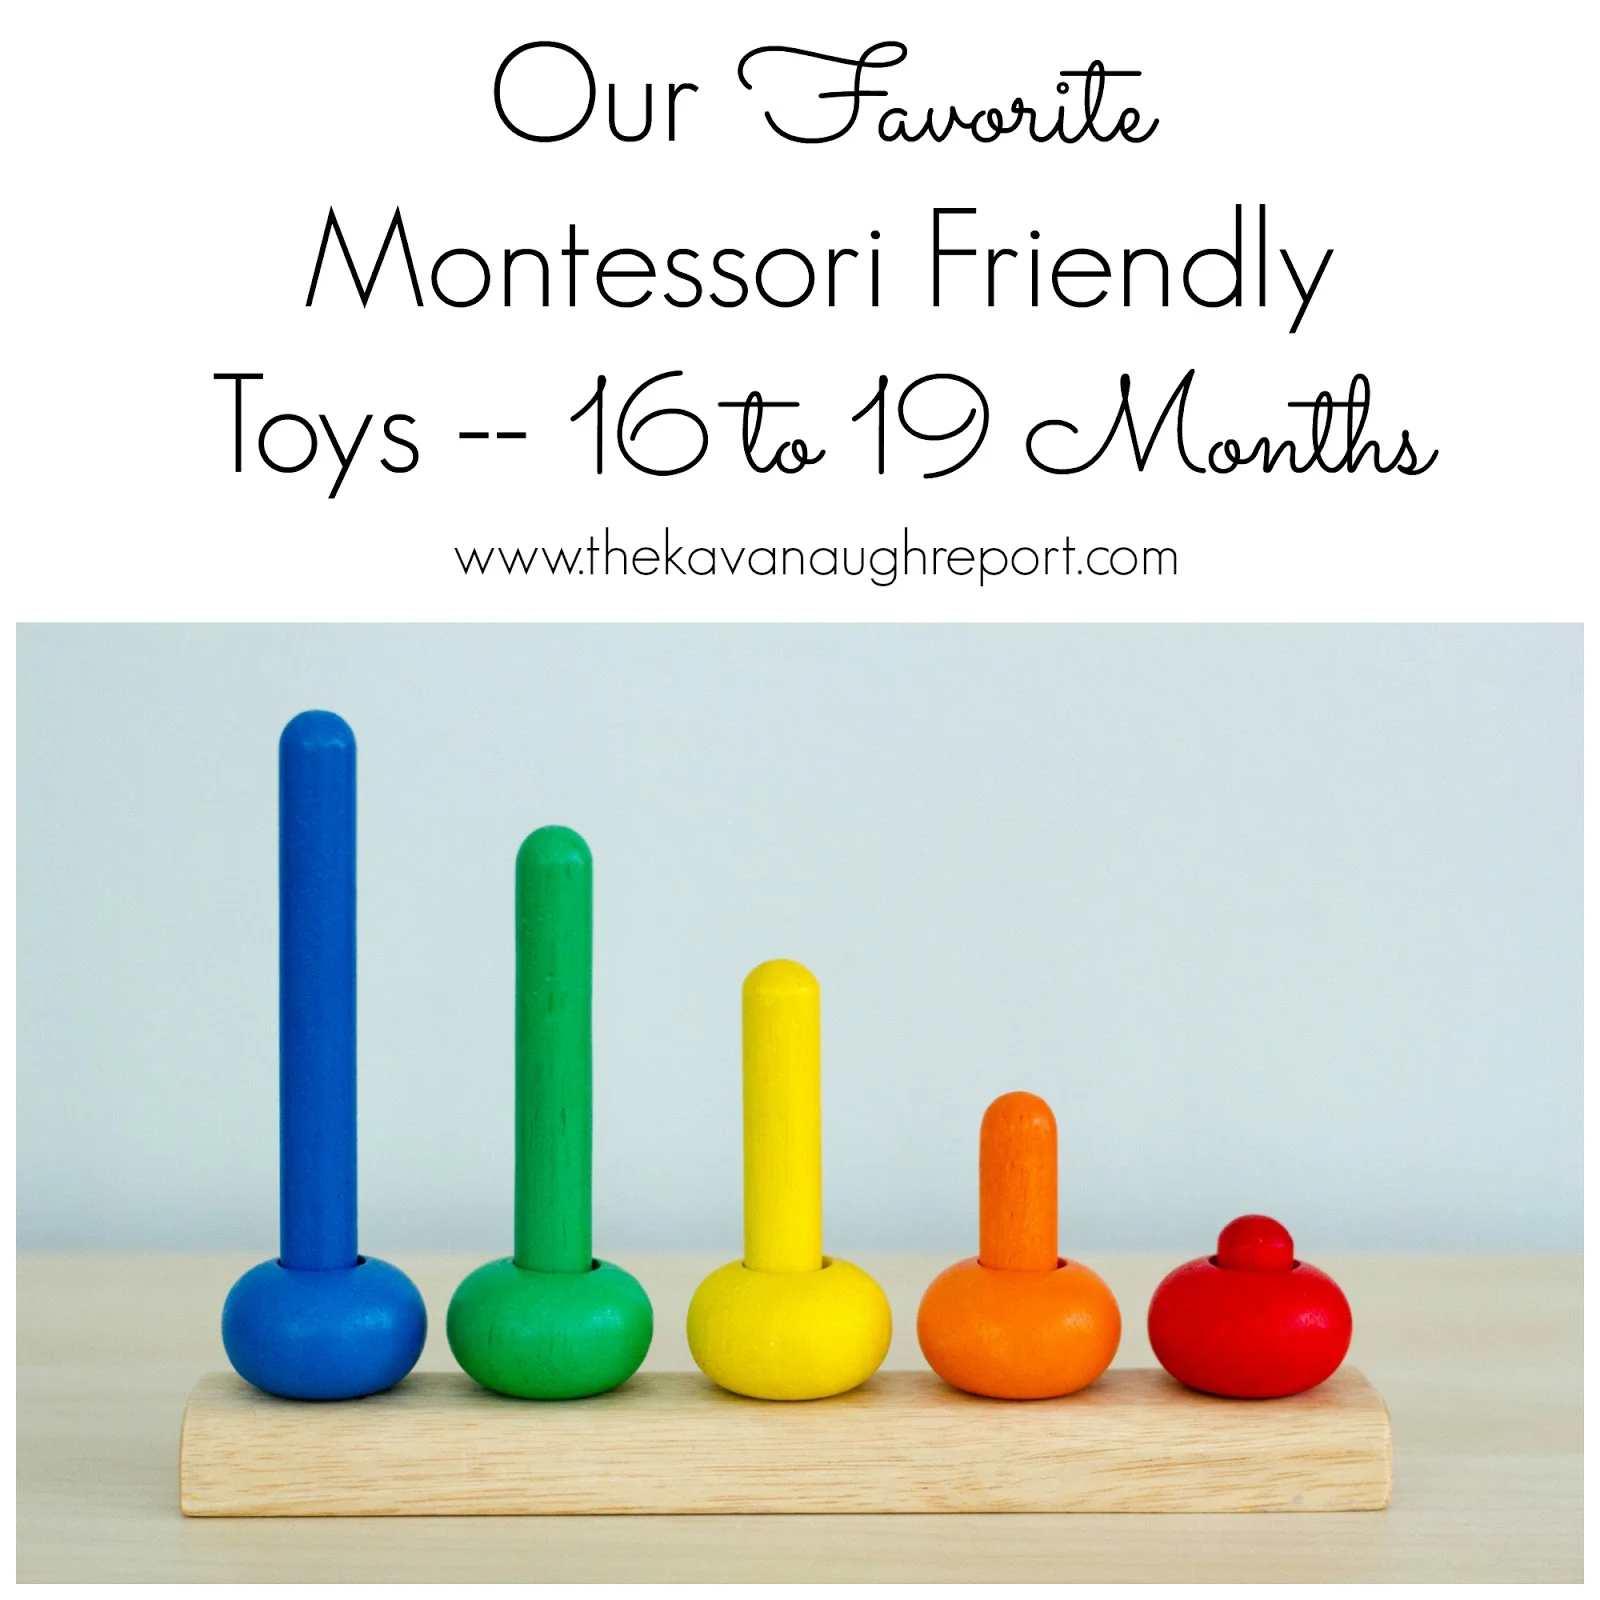 Montessori friendly toys for toddlers from 16 to 19 months.